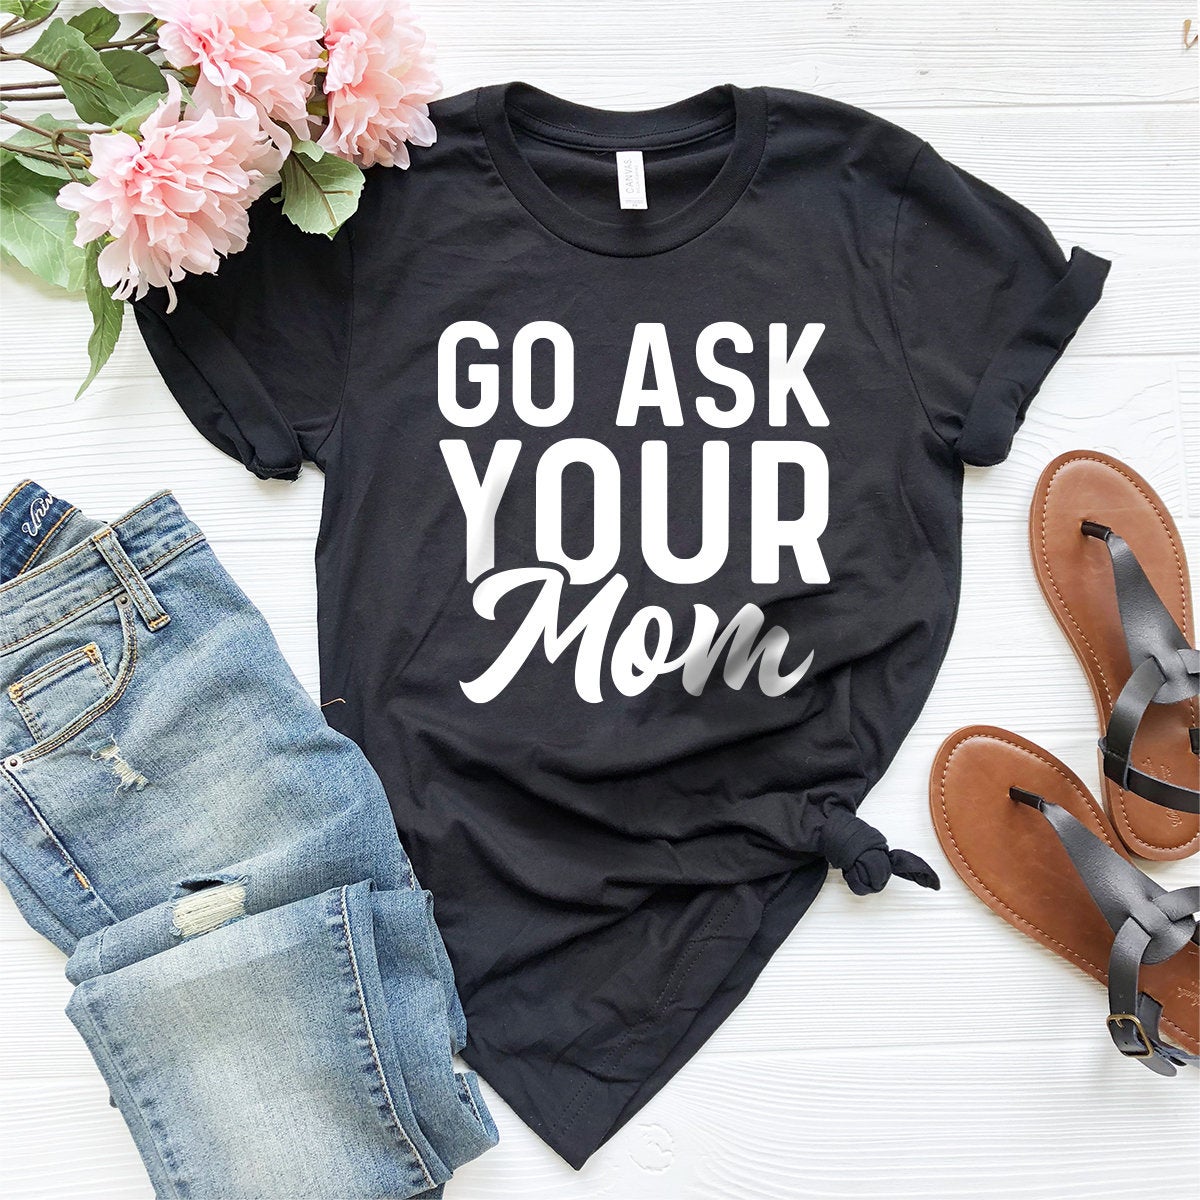 Funny Father Shirt, Dad Shirt, Dad T-Shirt, Dad Gift, Dad Tee, Gift For Dad, Dad Birthday Gift - Fastdeliverytees.com